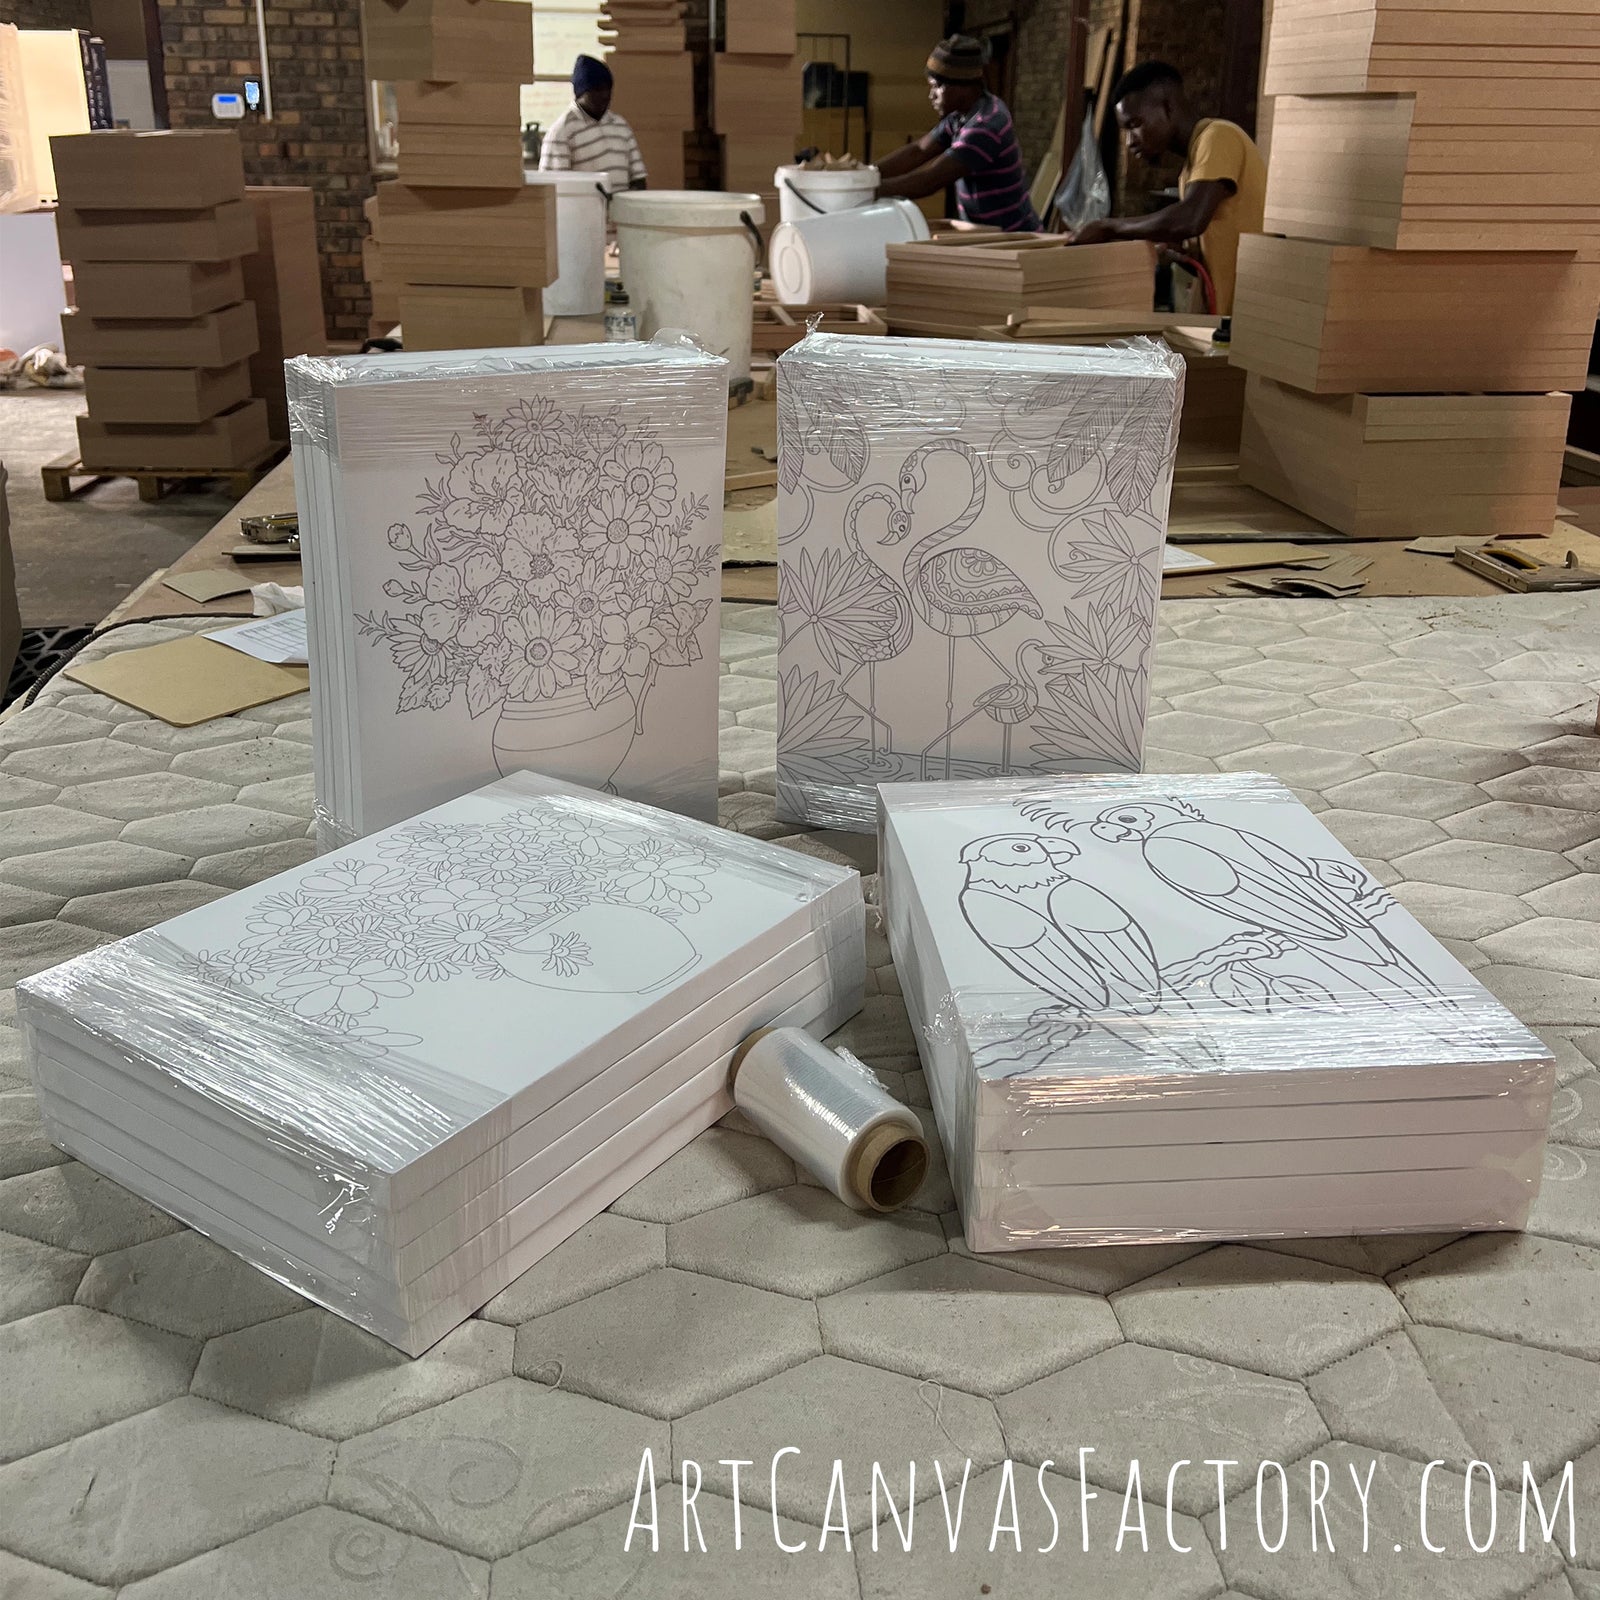 ACF Canvasses, Wholesale Canvas, Canvas For Painting